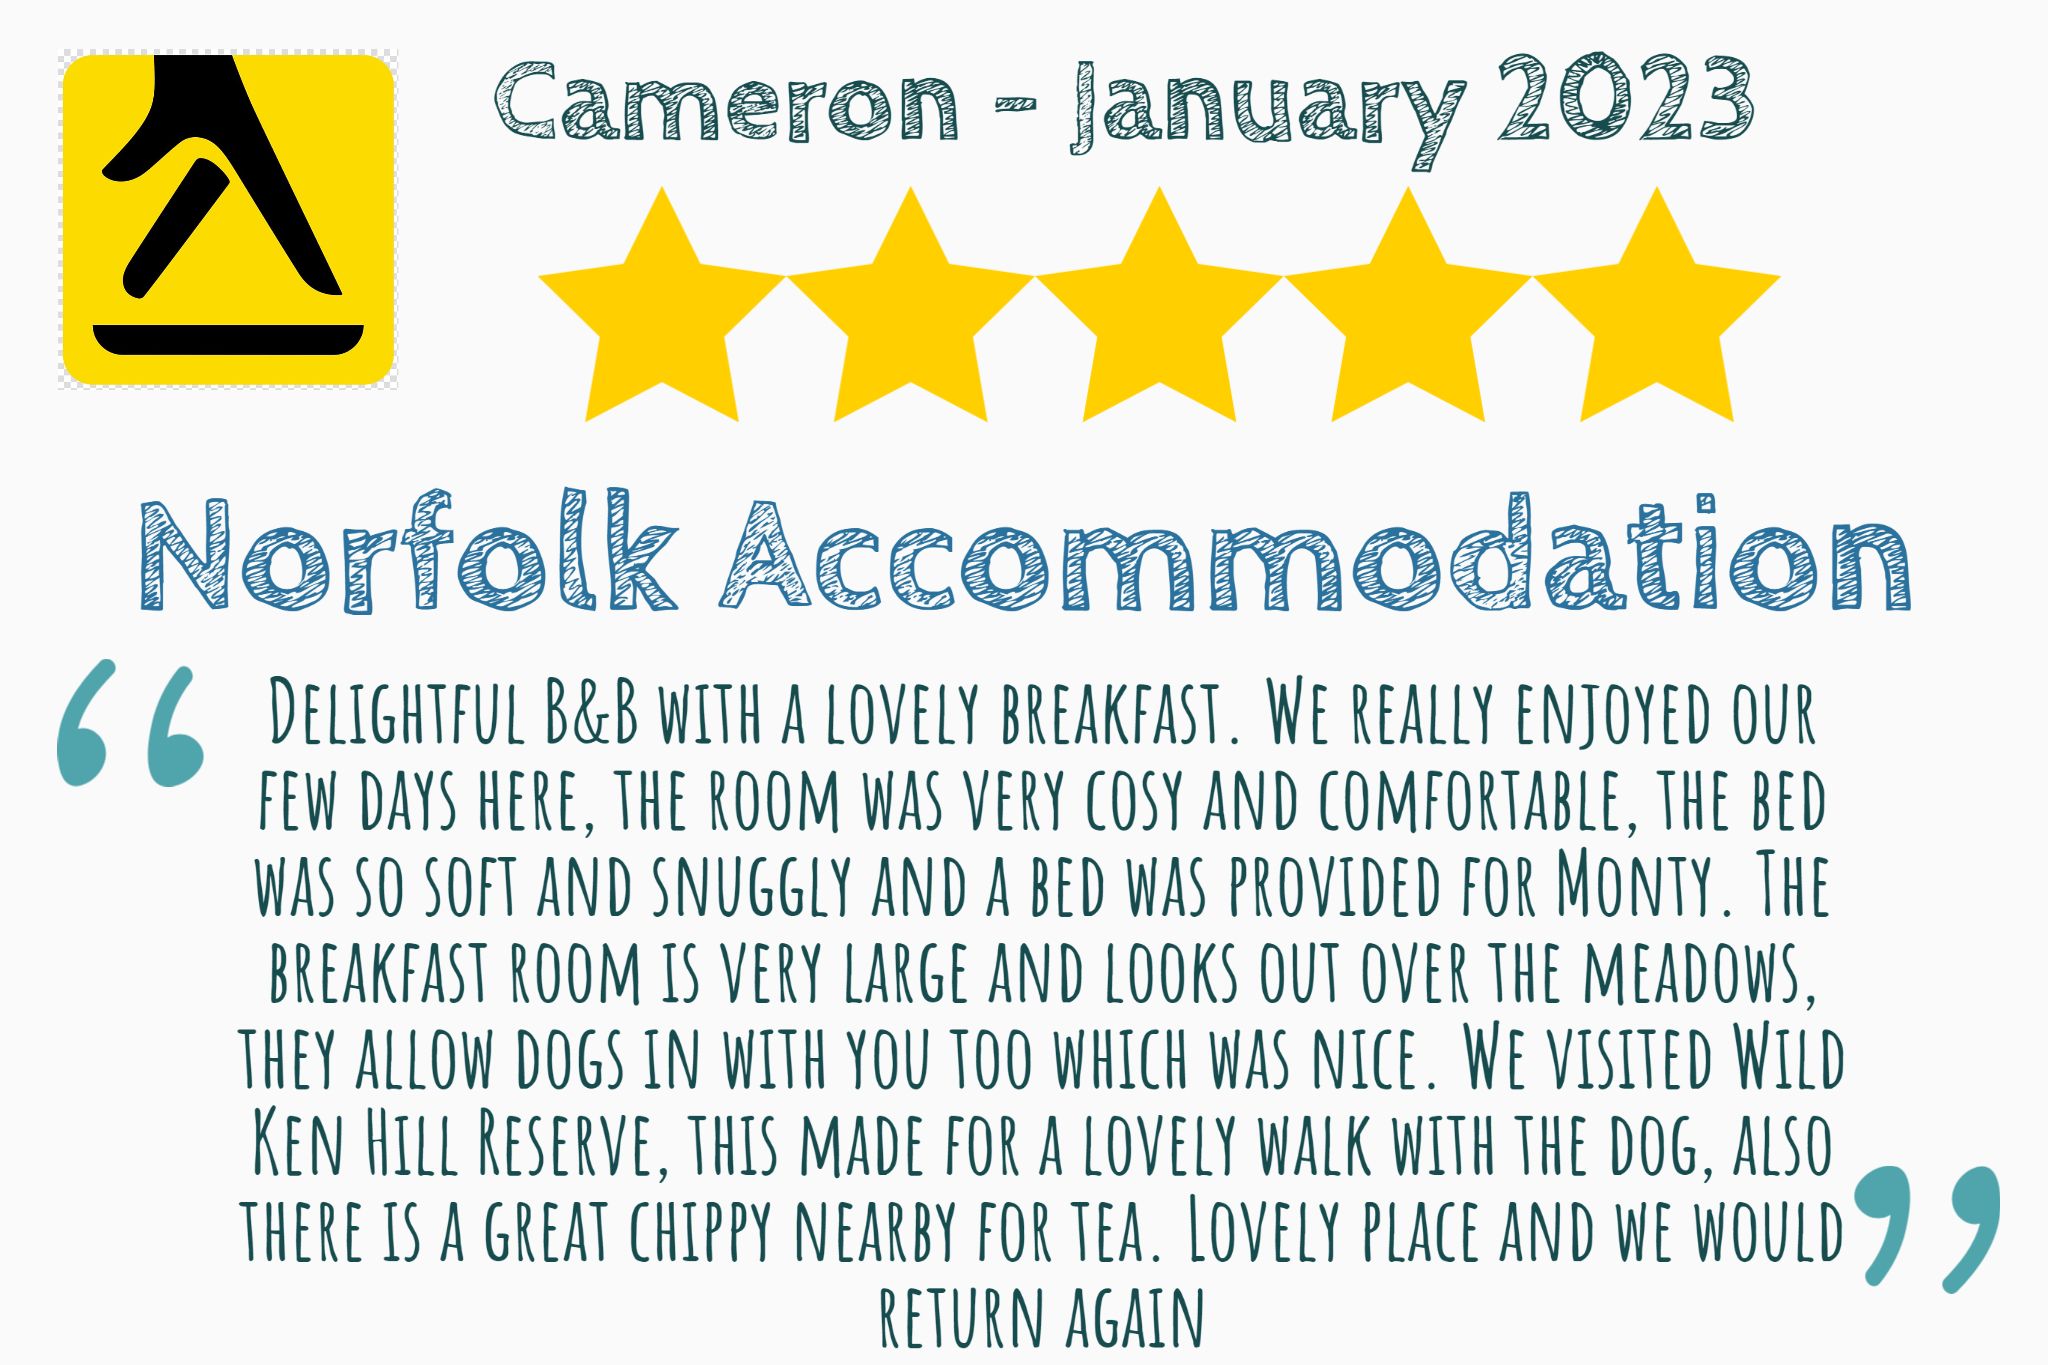 Cameron's Yell Review of a cosy, snuggly room in January